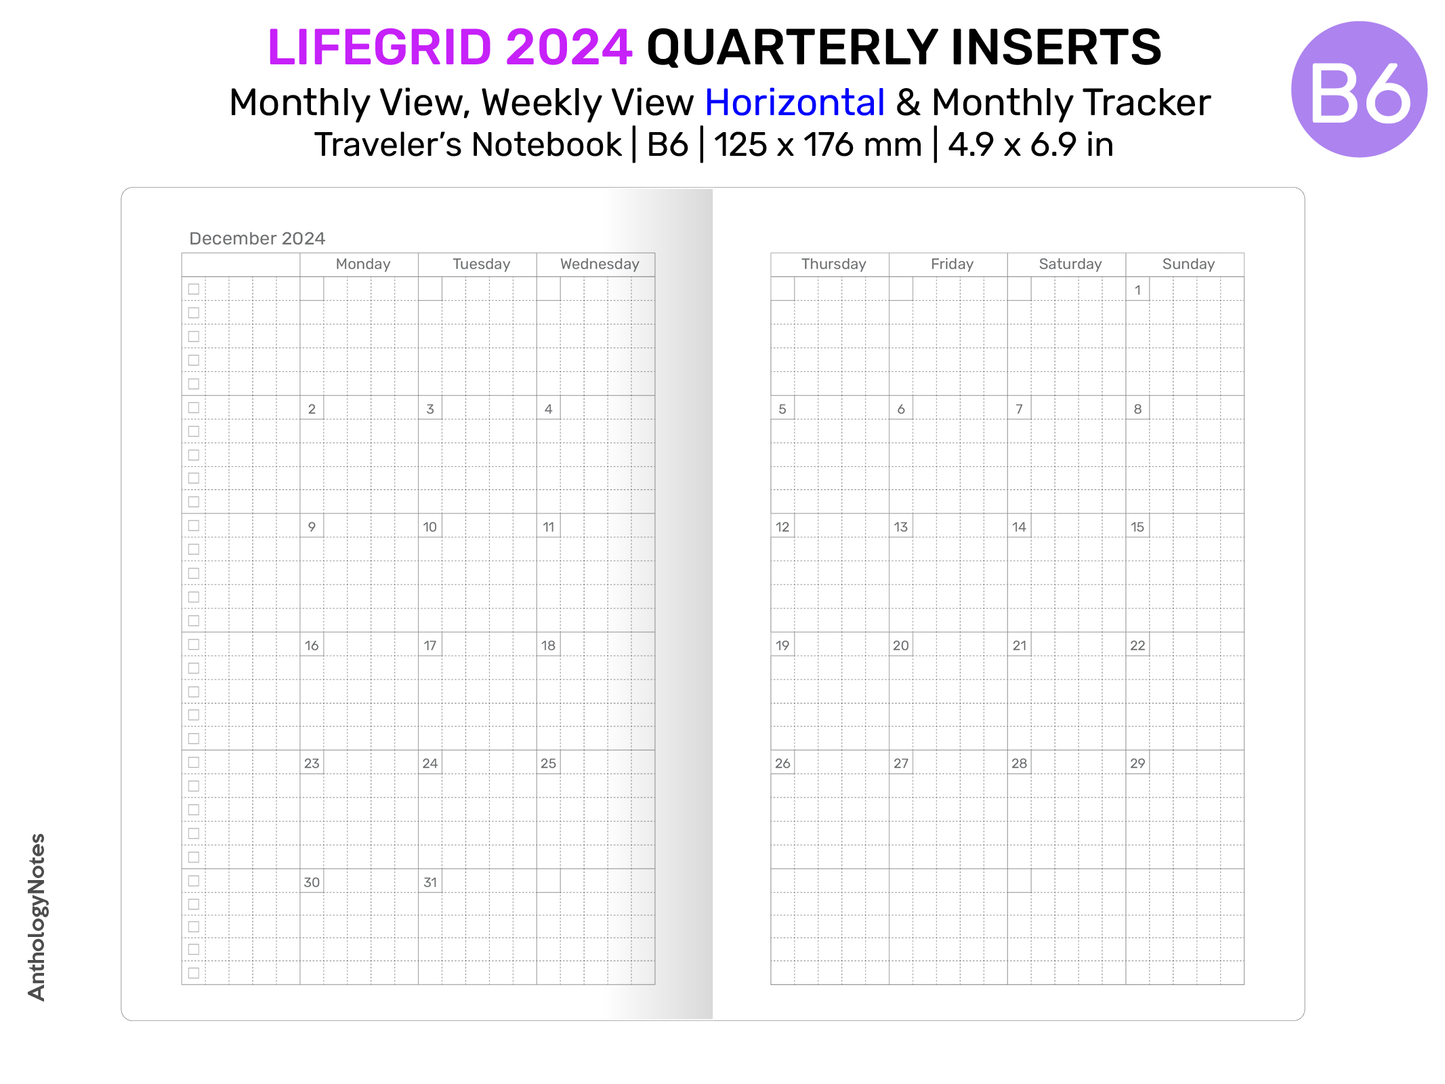 B6 LIFEGRID 2024 Quarterly Traveler's Notebook - Monthly View, Weekly View HORIZONTAL and Monthly Tracker - Printable TN Insert